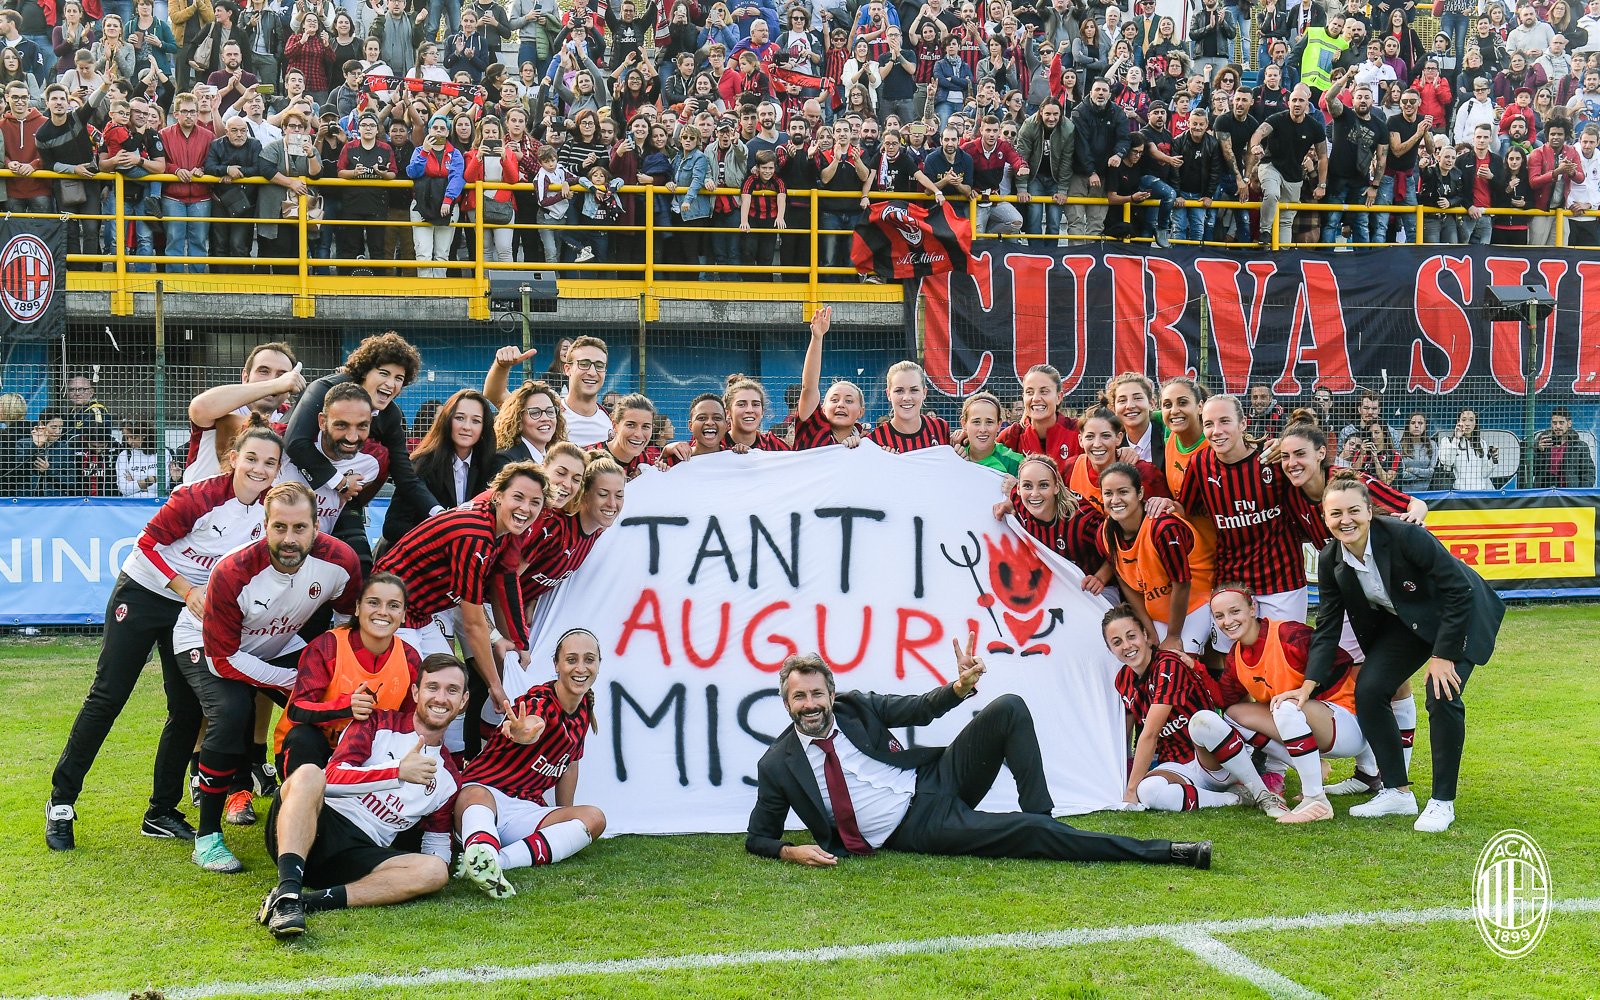 AC Milan women make history by winning first ever derby - the photos